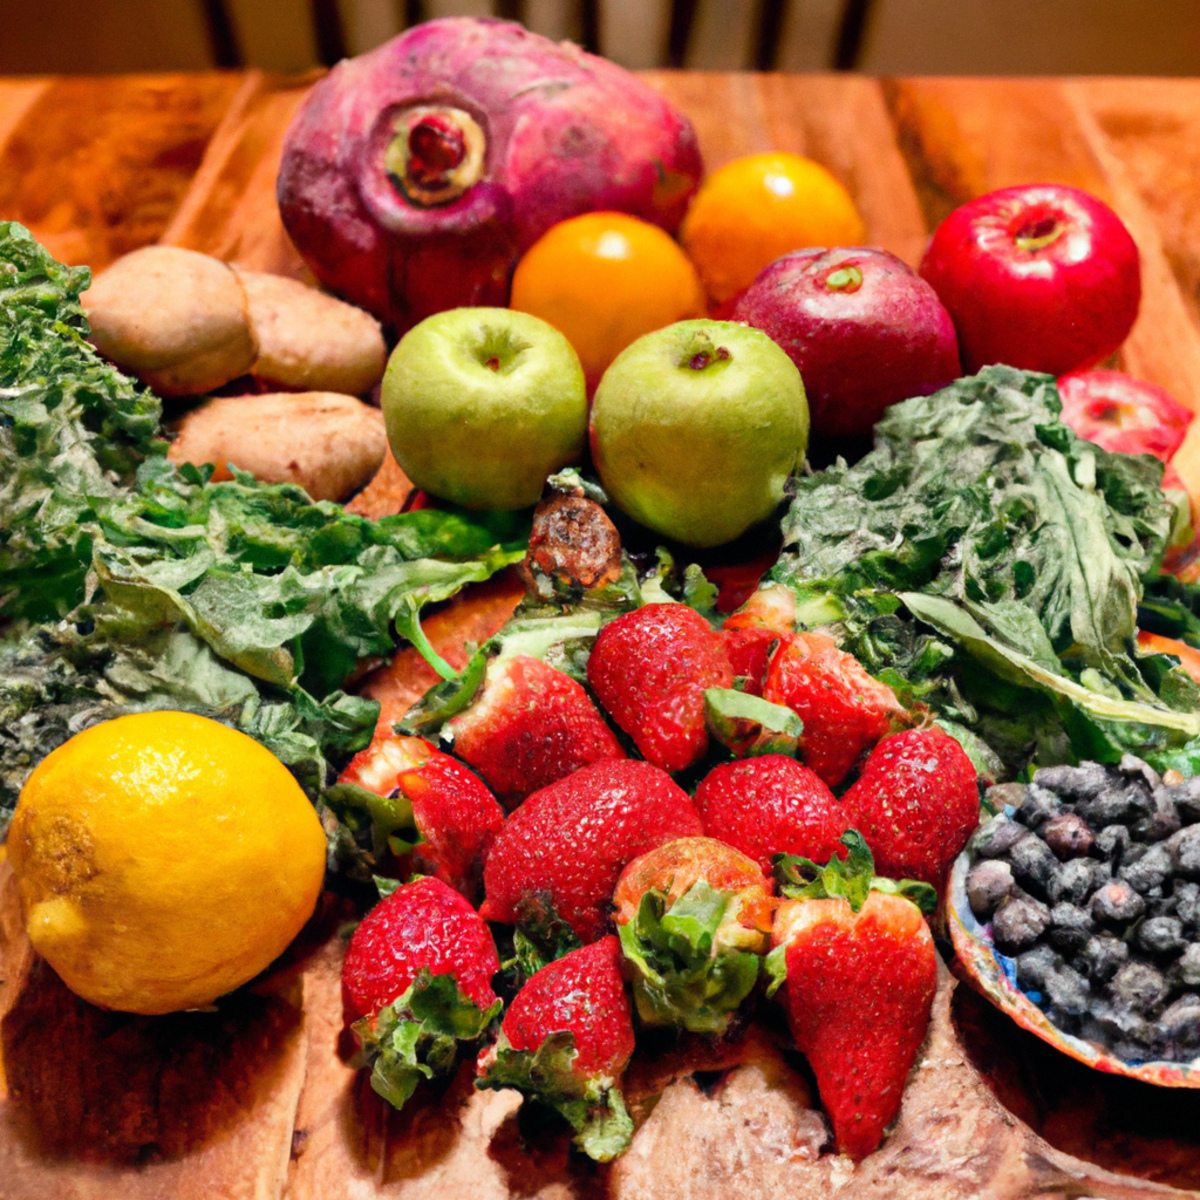 The photo shows a wooden table with a variety of organic fruits and vegetables arranged in a visually appealing manner. The objects include bright red strawberries, plump blueberries, crisp green apples, juicy oranges, vibrant yellow peppers, leafy kale, and earthy potatoes. The produce looks fresh and inviting, with no signs of pesticides or chemicals. The photo captures the essence of the article, highlighting the importance of choosing organic foods for a healthier lifestyle.